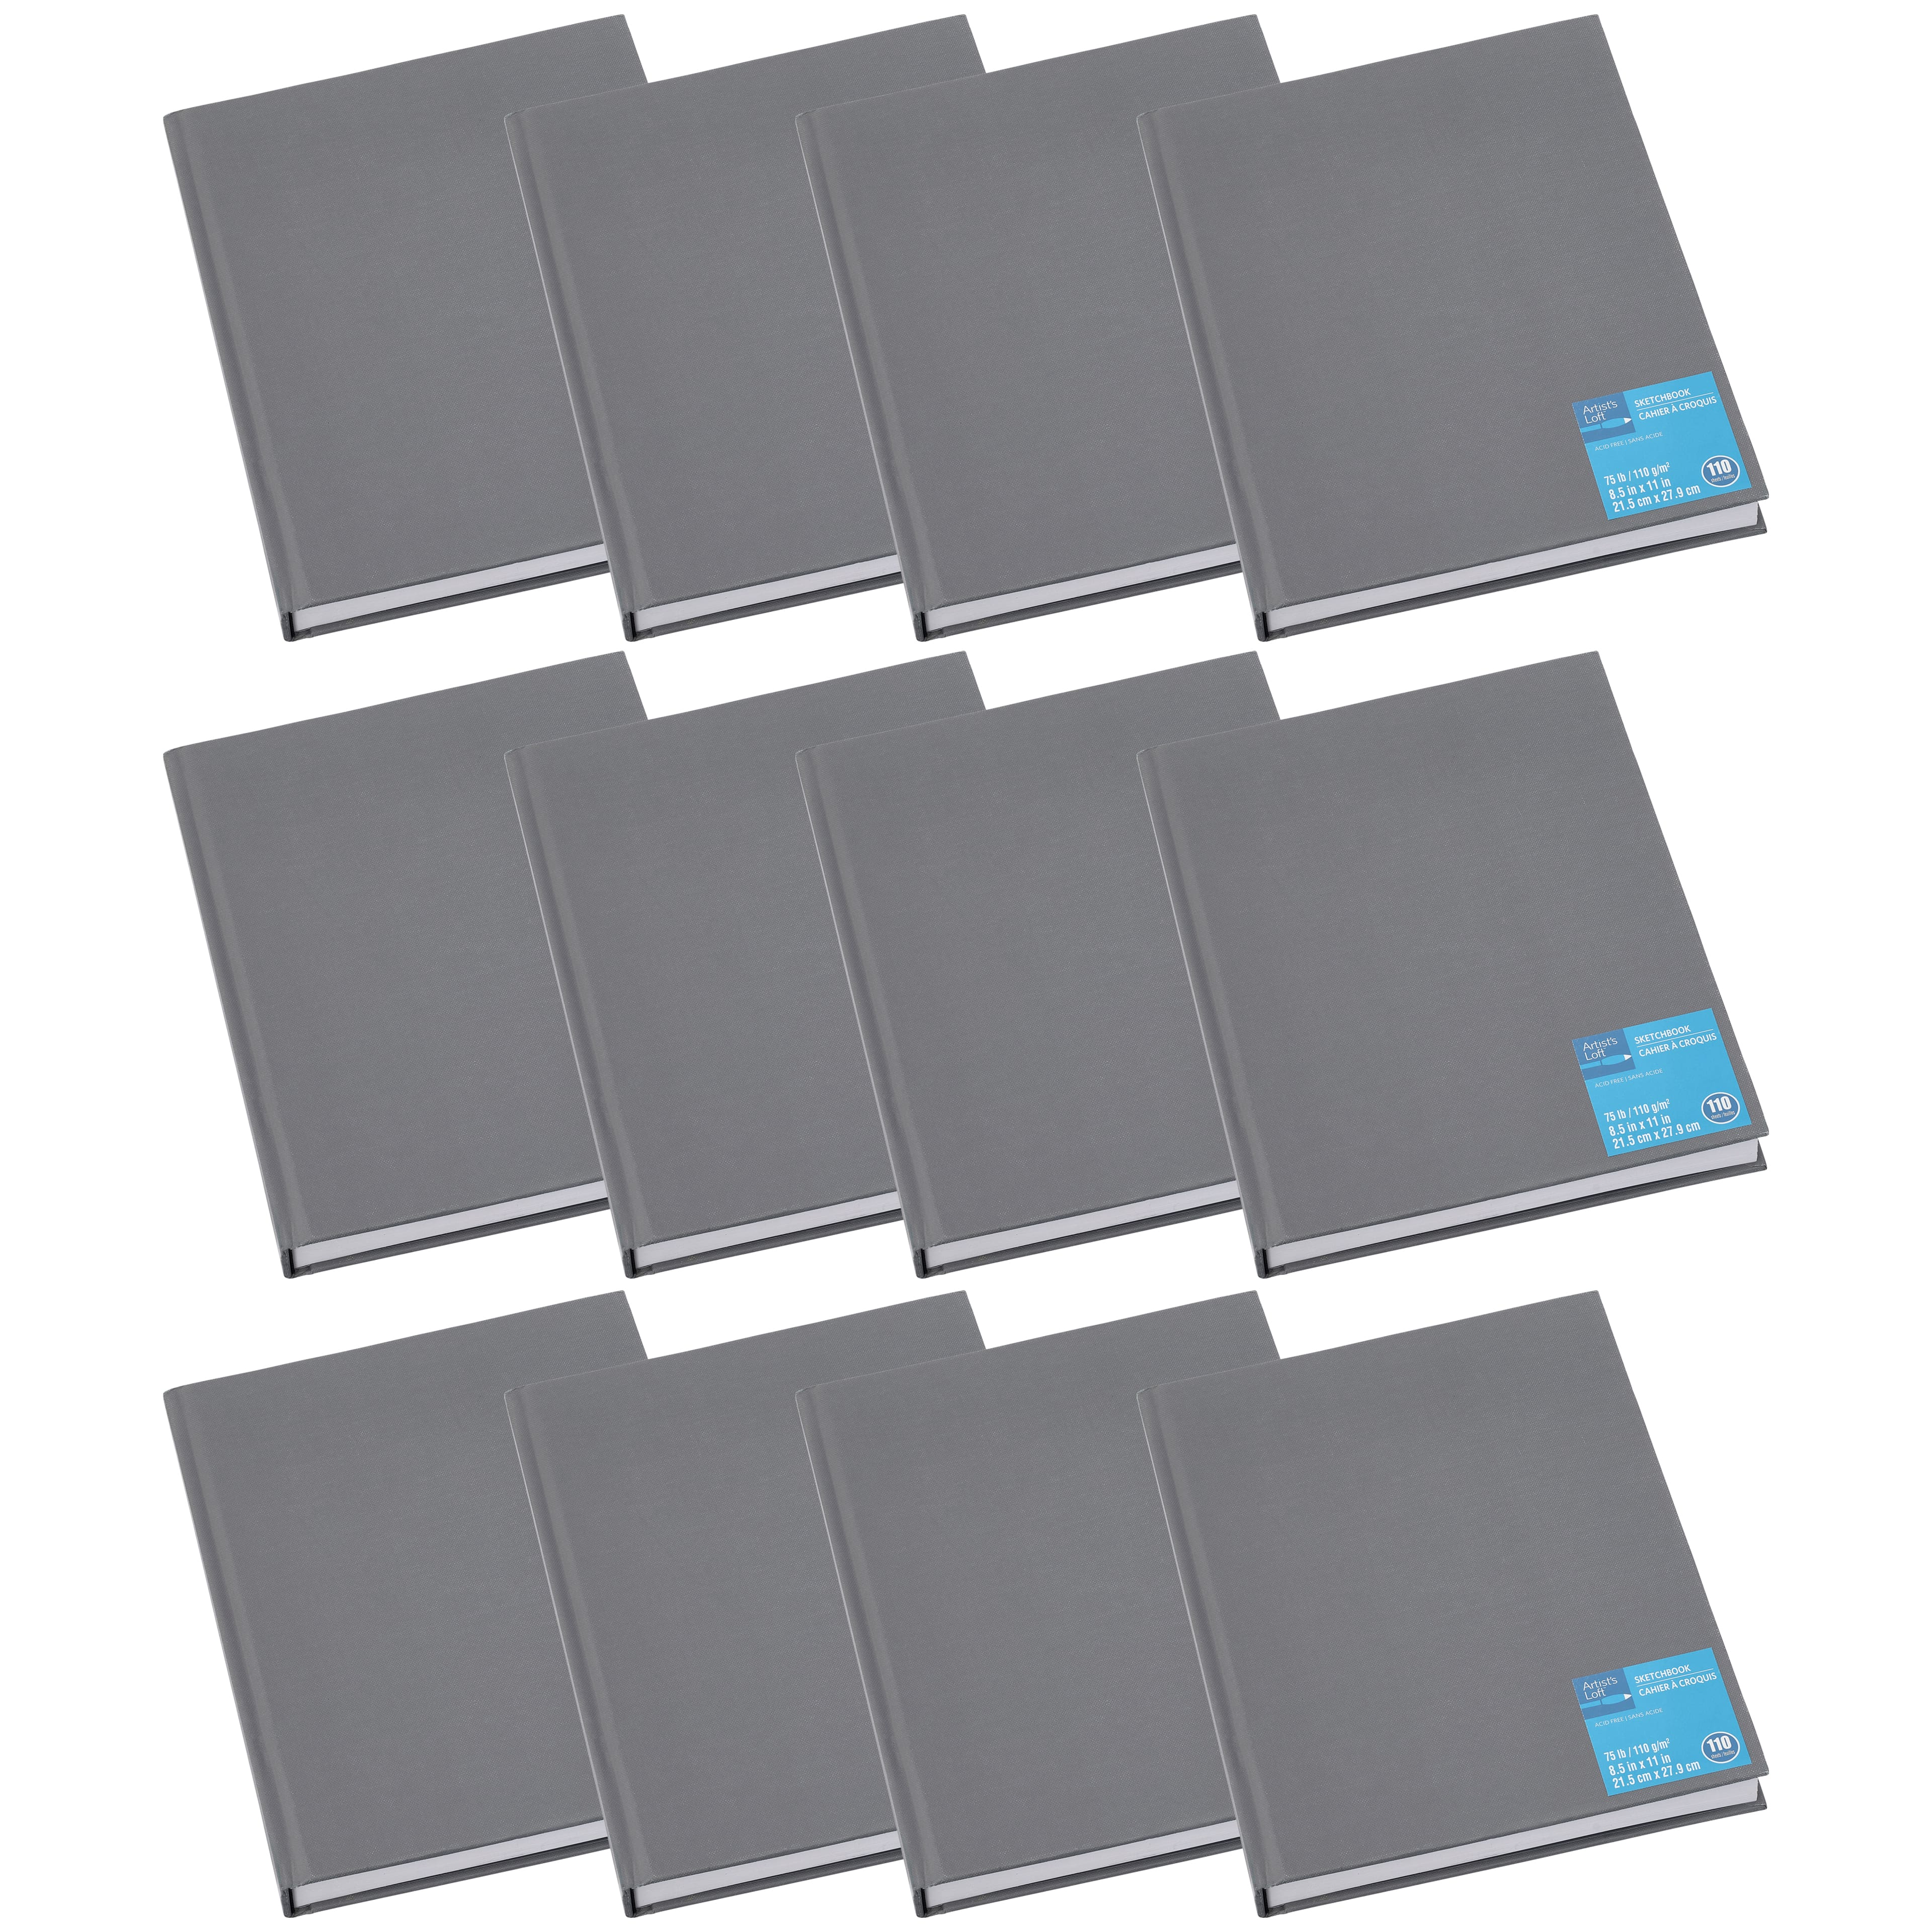 12 Pack: Gray Hardcover Sketchbook by Artist's Loft, 8.5 inch x 11 inch, Size: 11 x 1.2 x 8.5